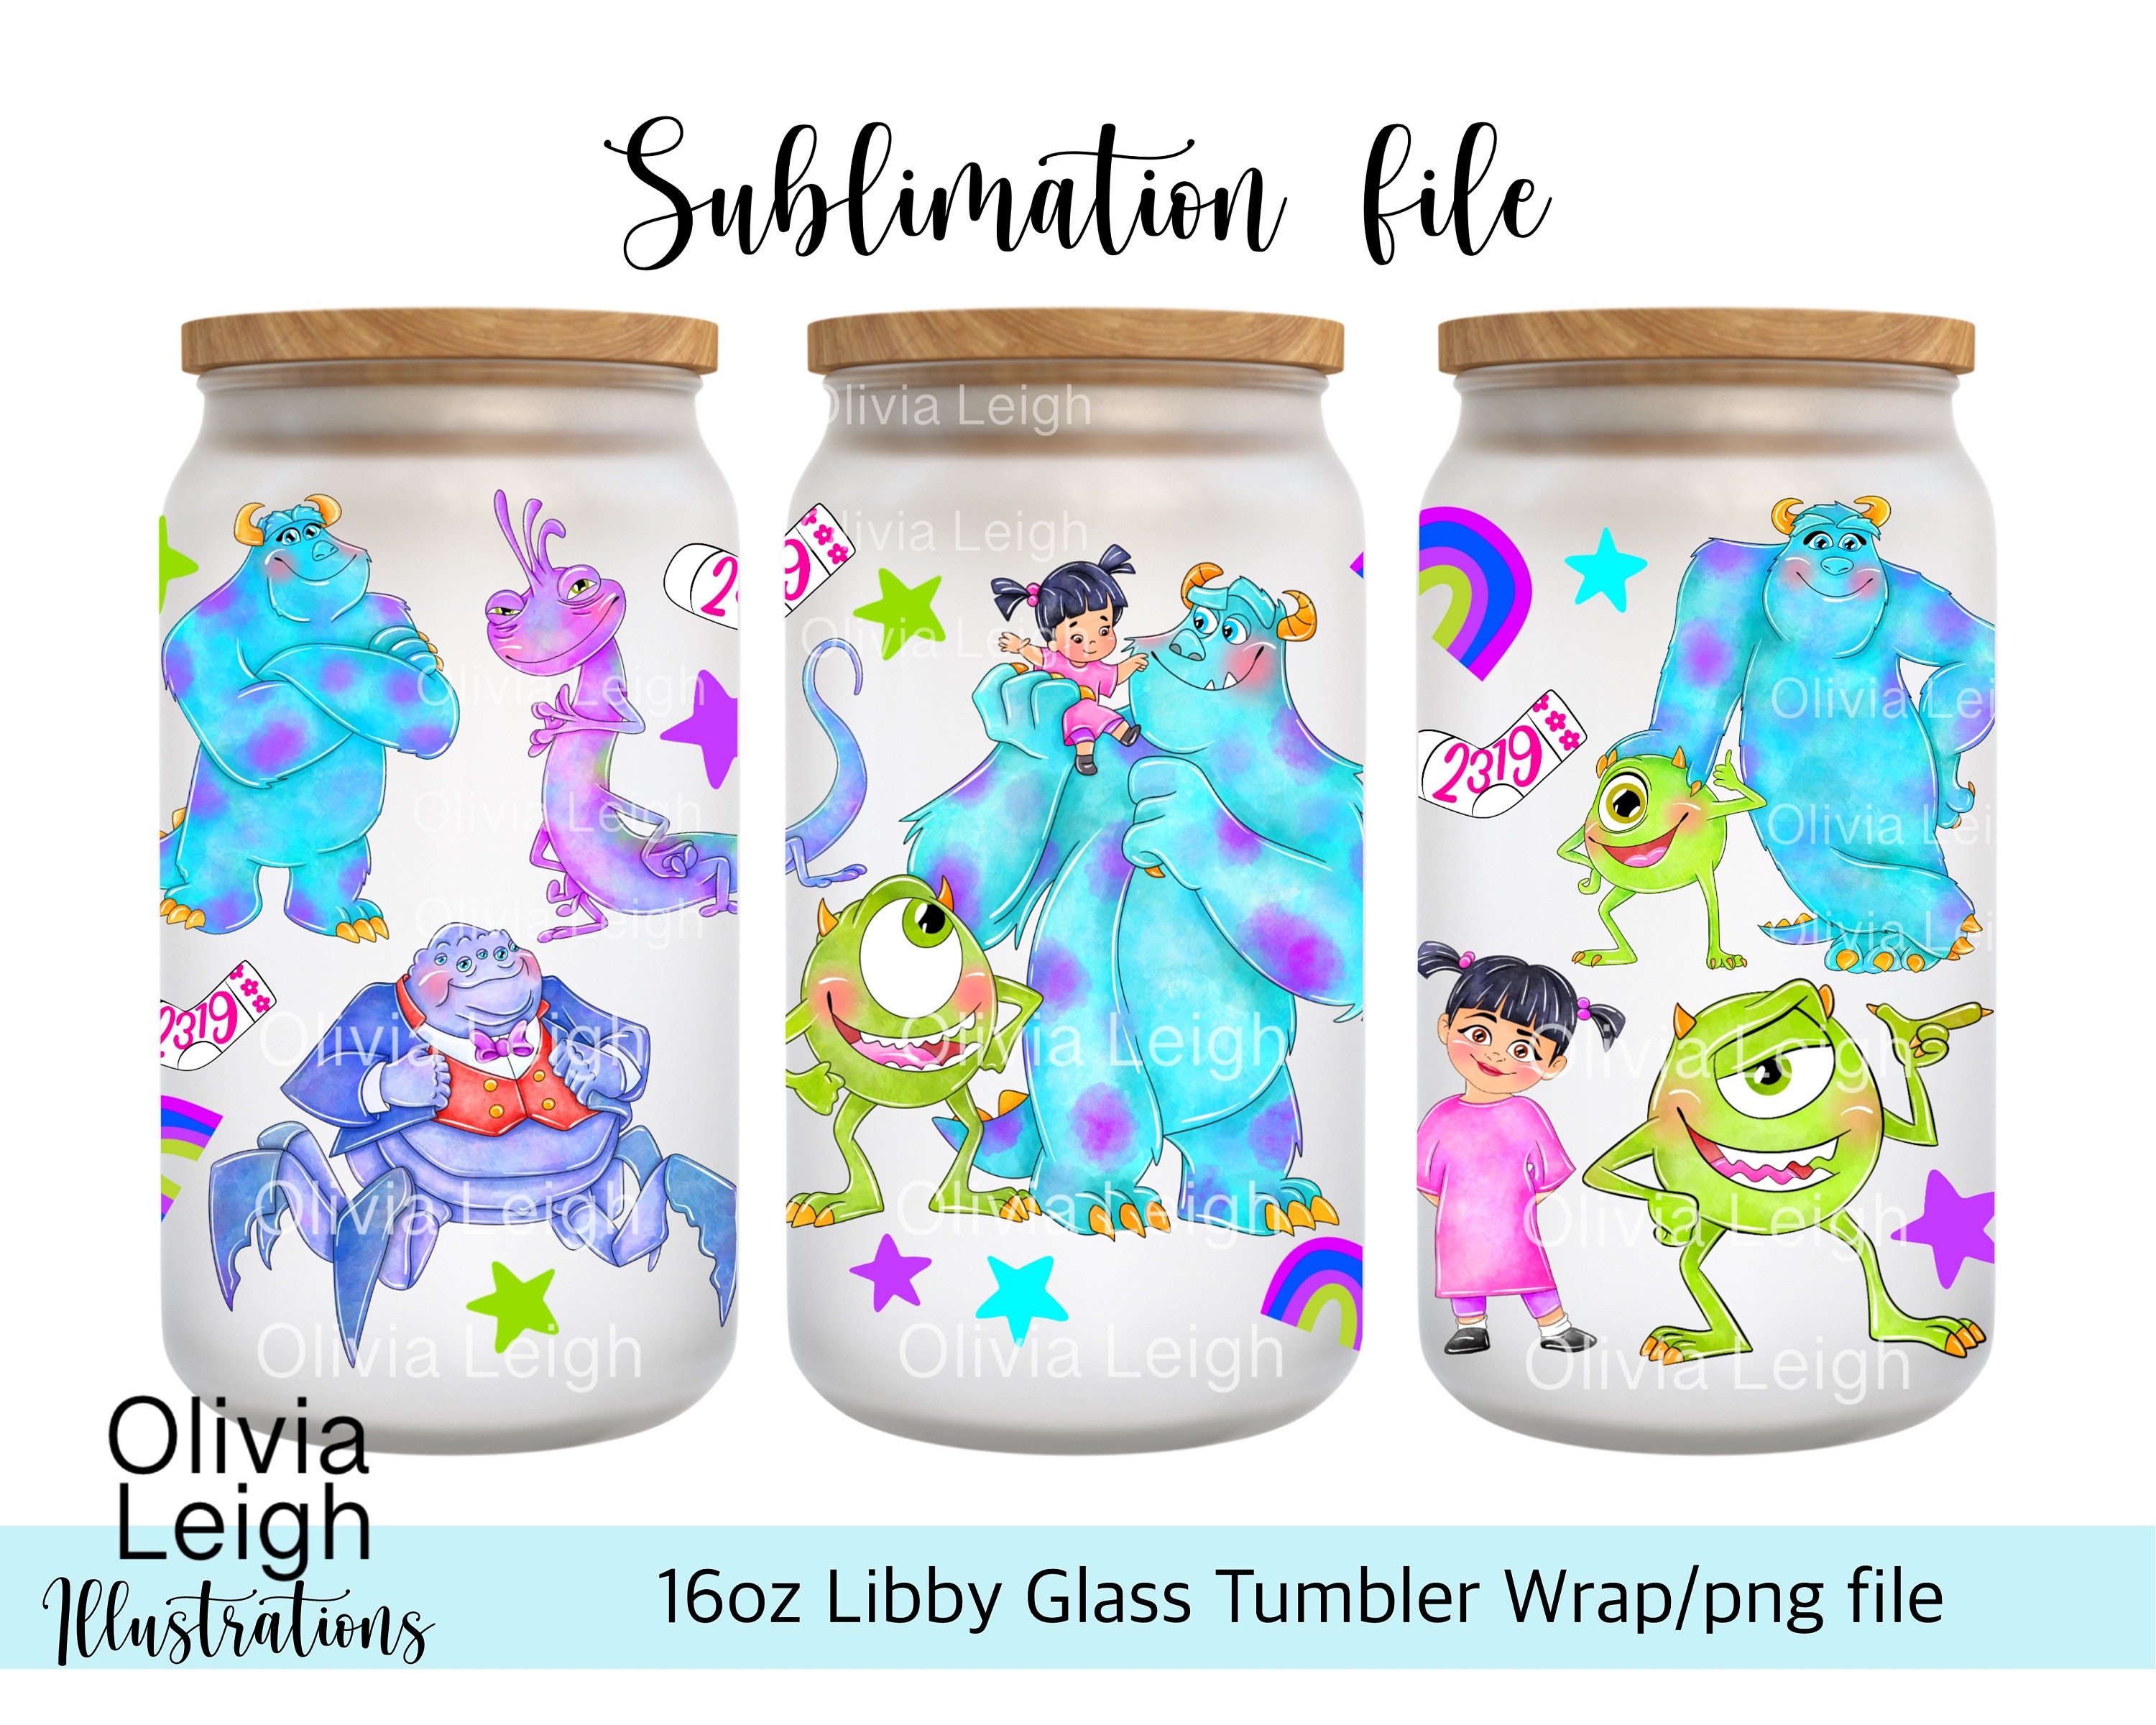 5 Little Monsters: Glass Cups with Color Changing Vinyl